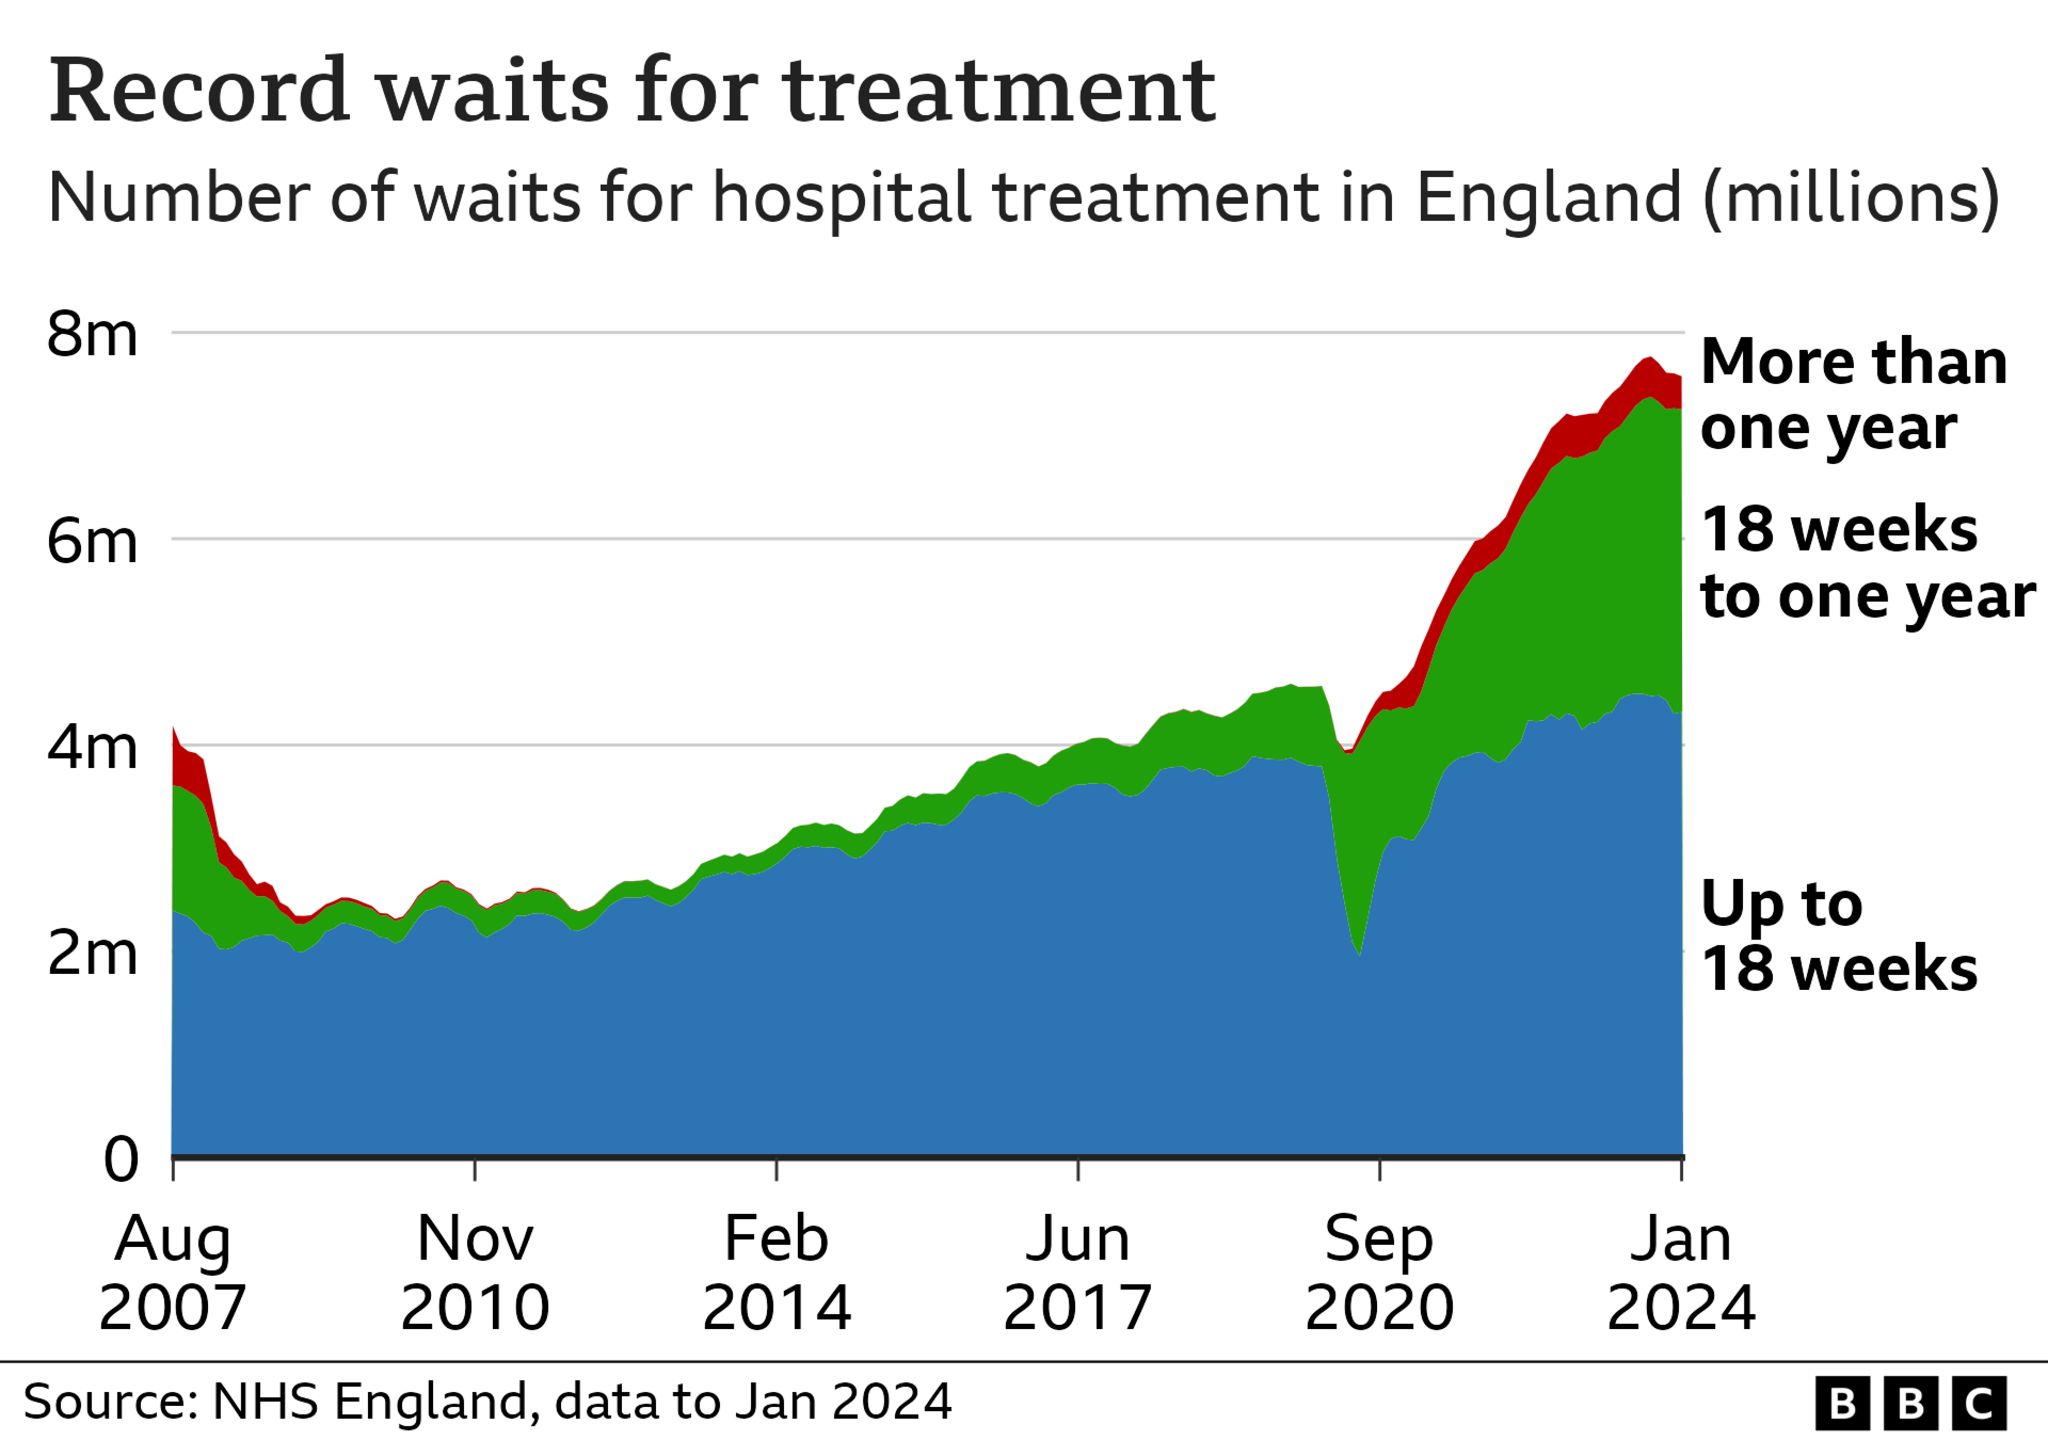 Chart showing NHS waiting list in England, which has fallen over the past five months, but is still well above where it was a year ago